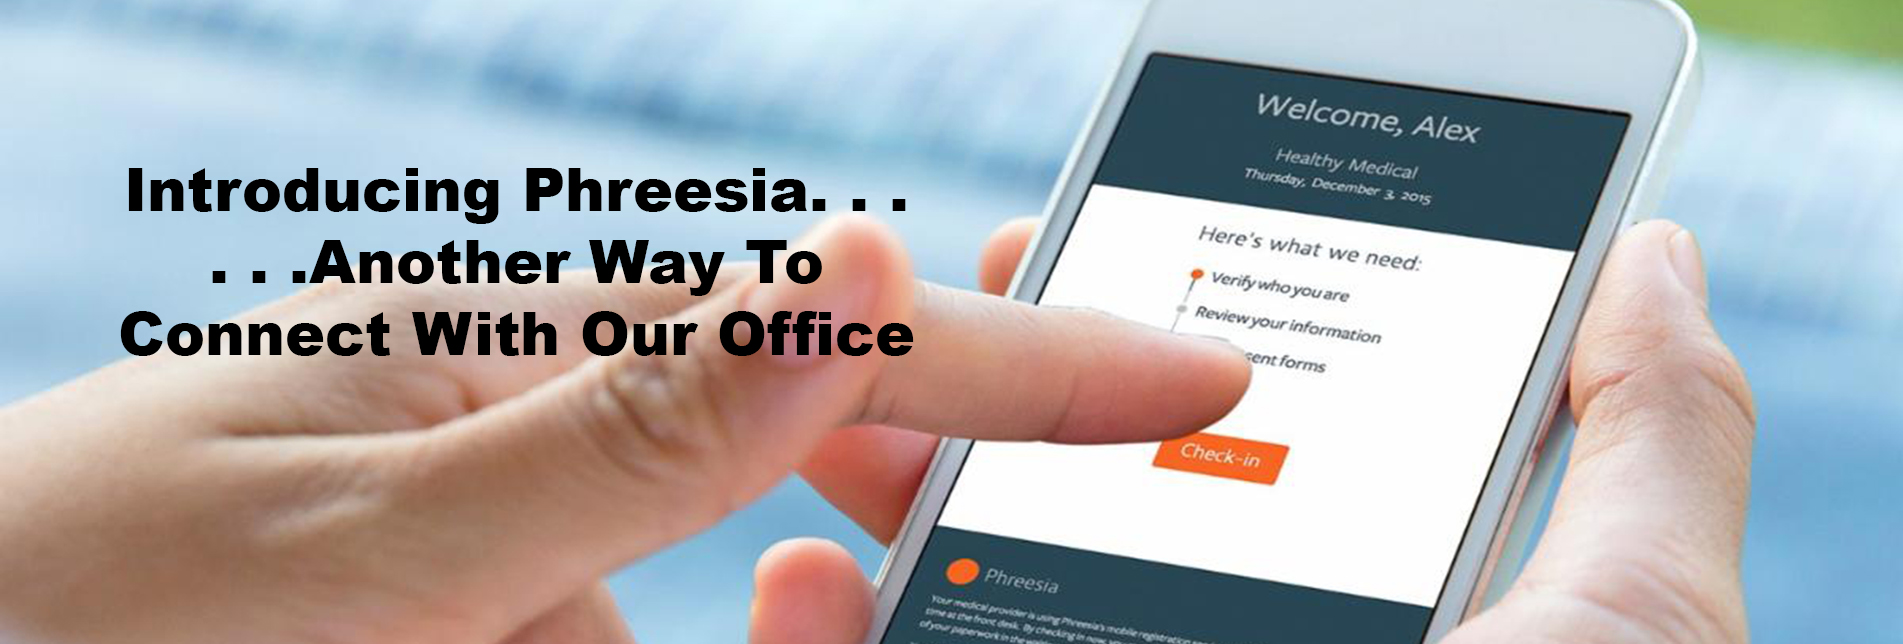 Introducing 'Phreesia'... Another Way To Connect With Our Office!